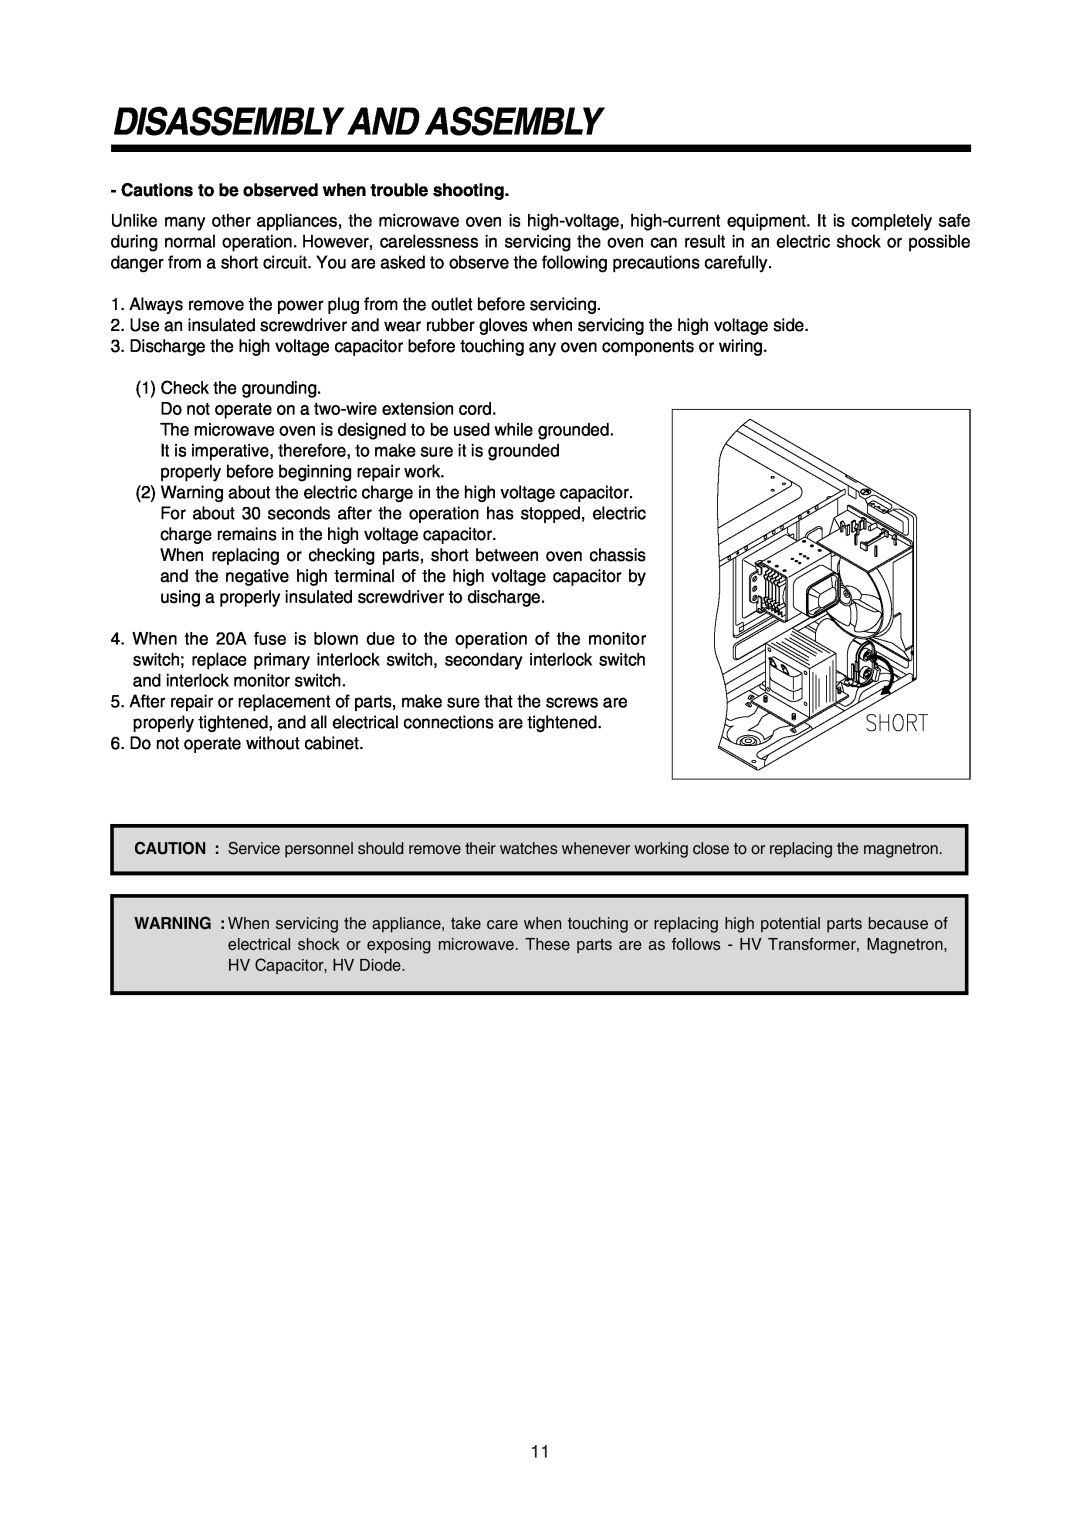 Daewoo 181GOA0A manual Disassembly And Assembly, Cautions to be observed when trouble shooting 